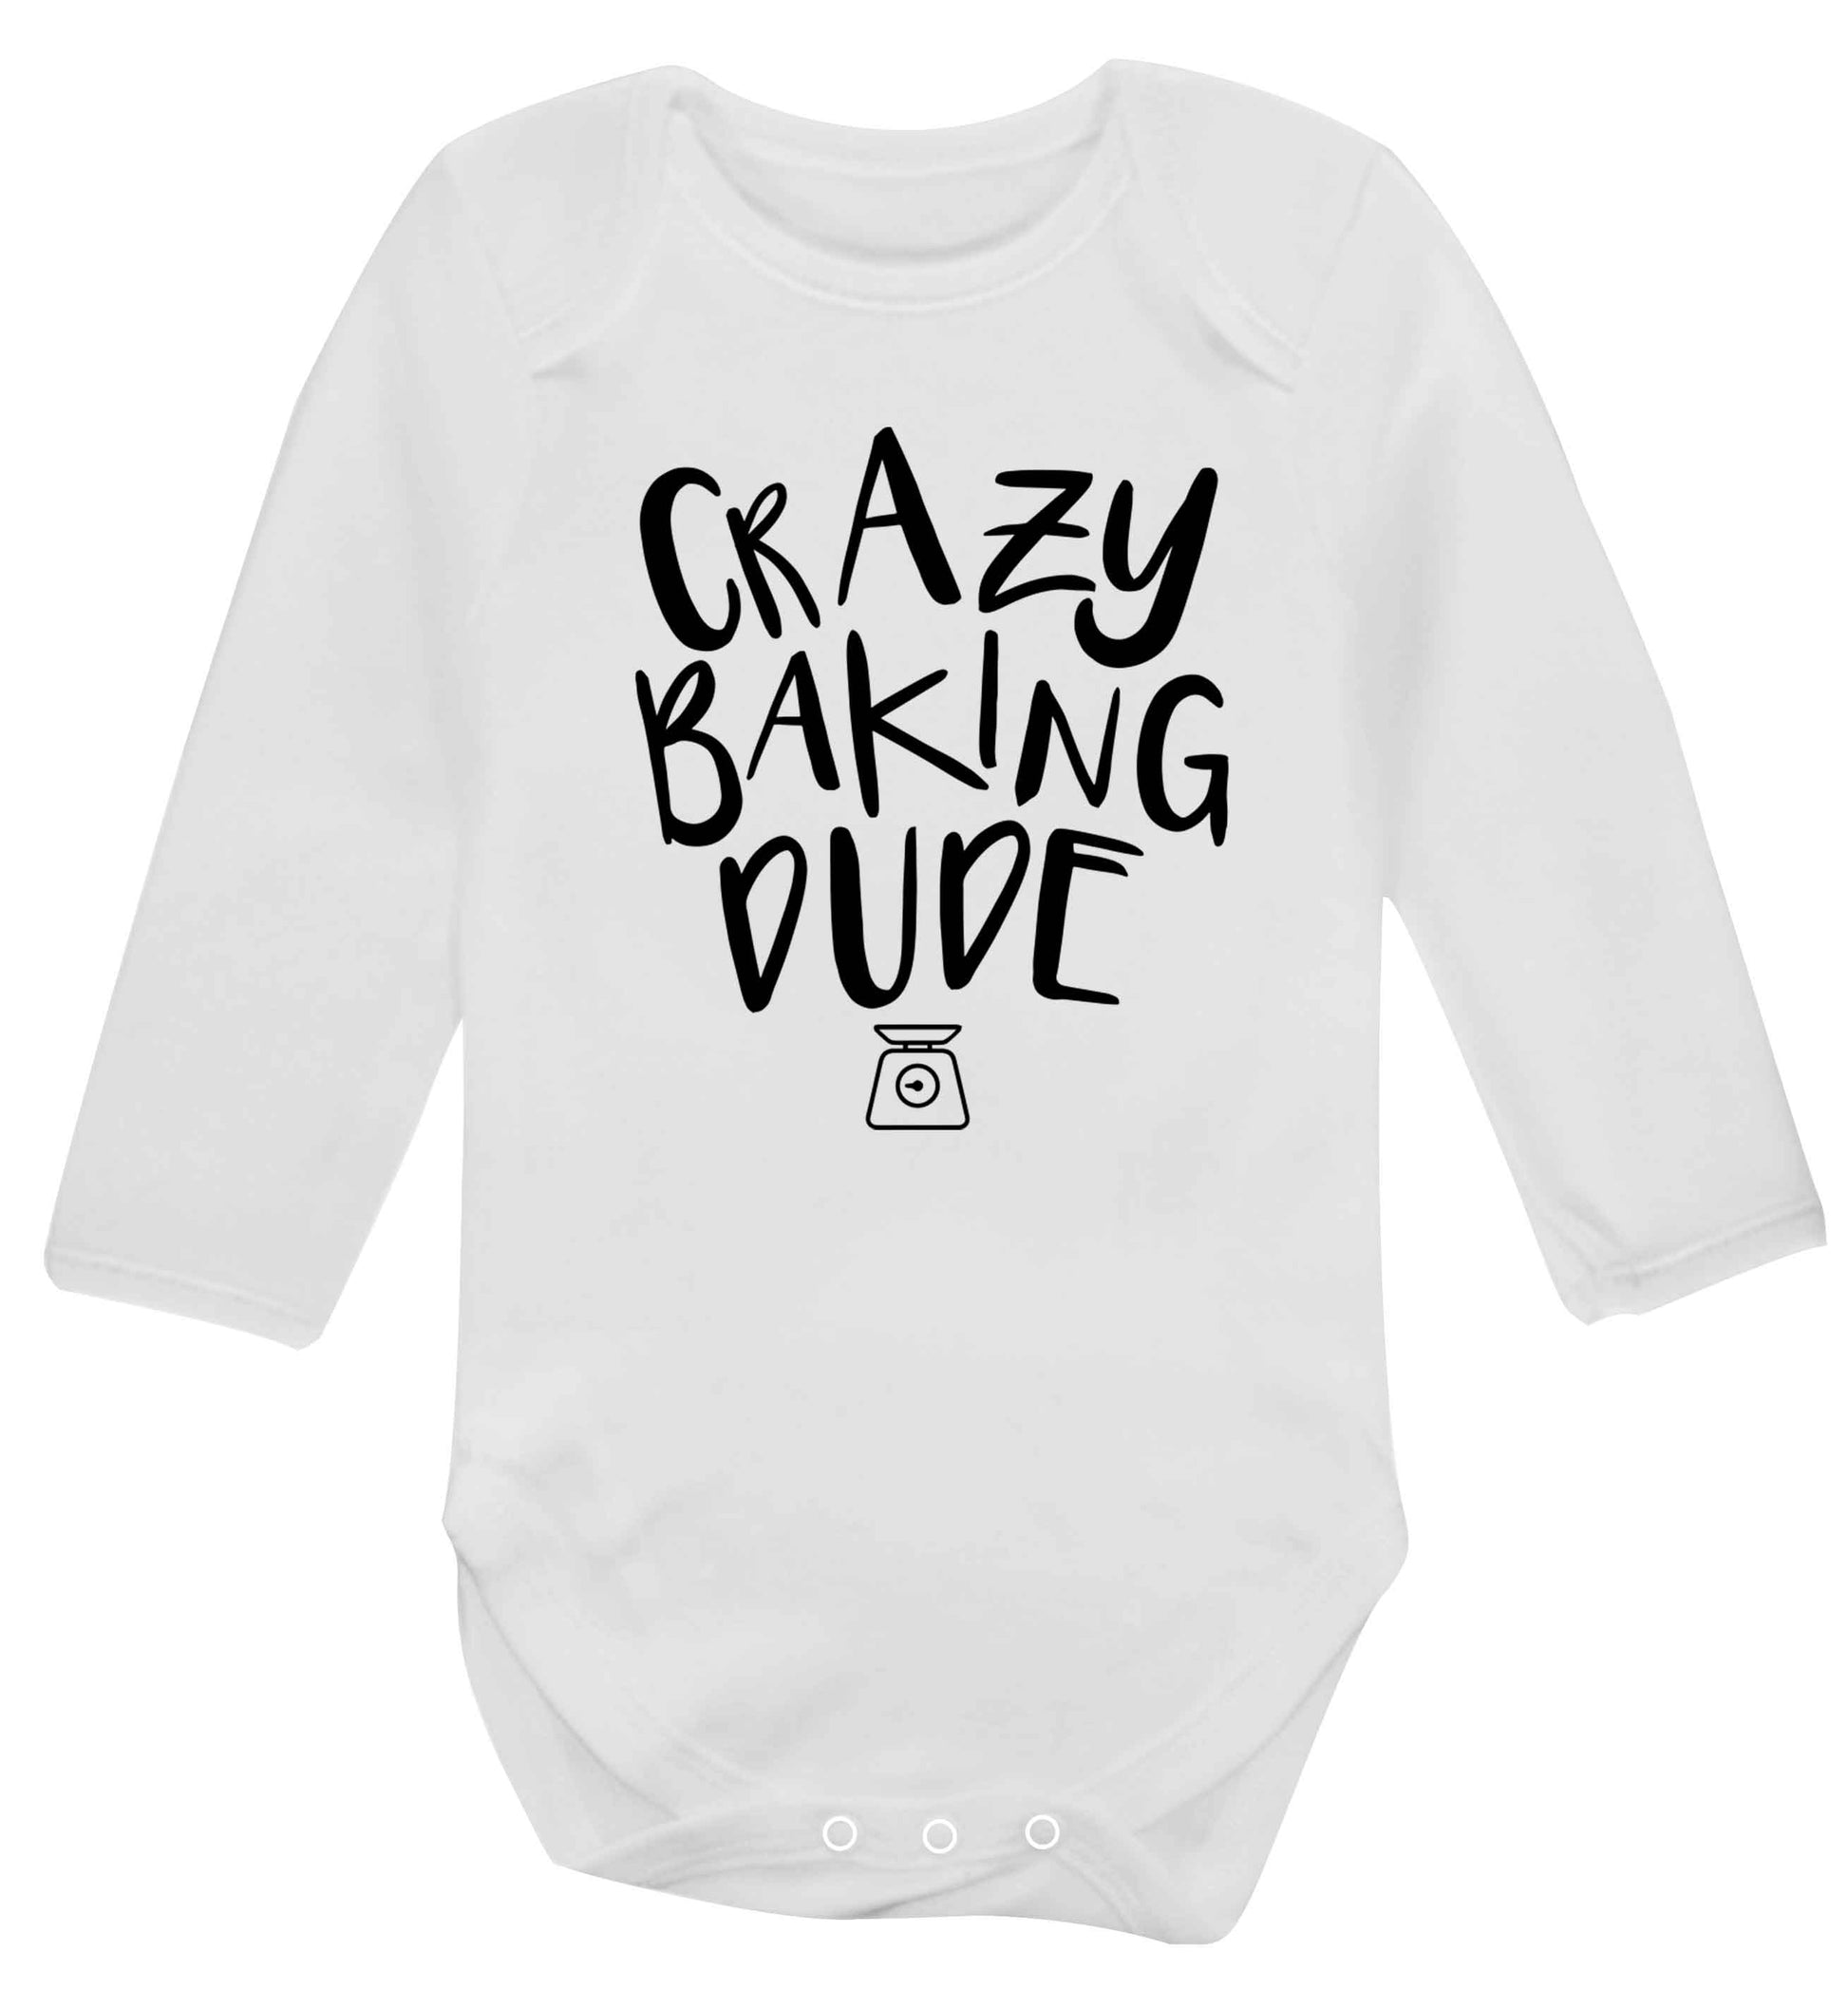 Crazy baking dude Baby Vest long sleeved white 6-12 months